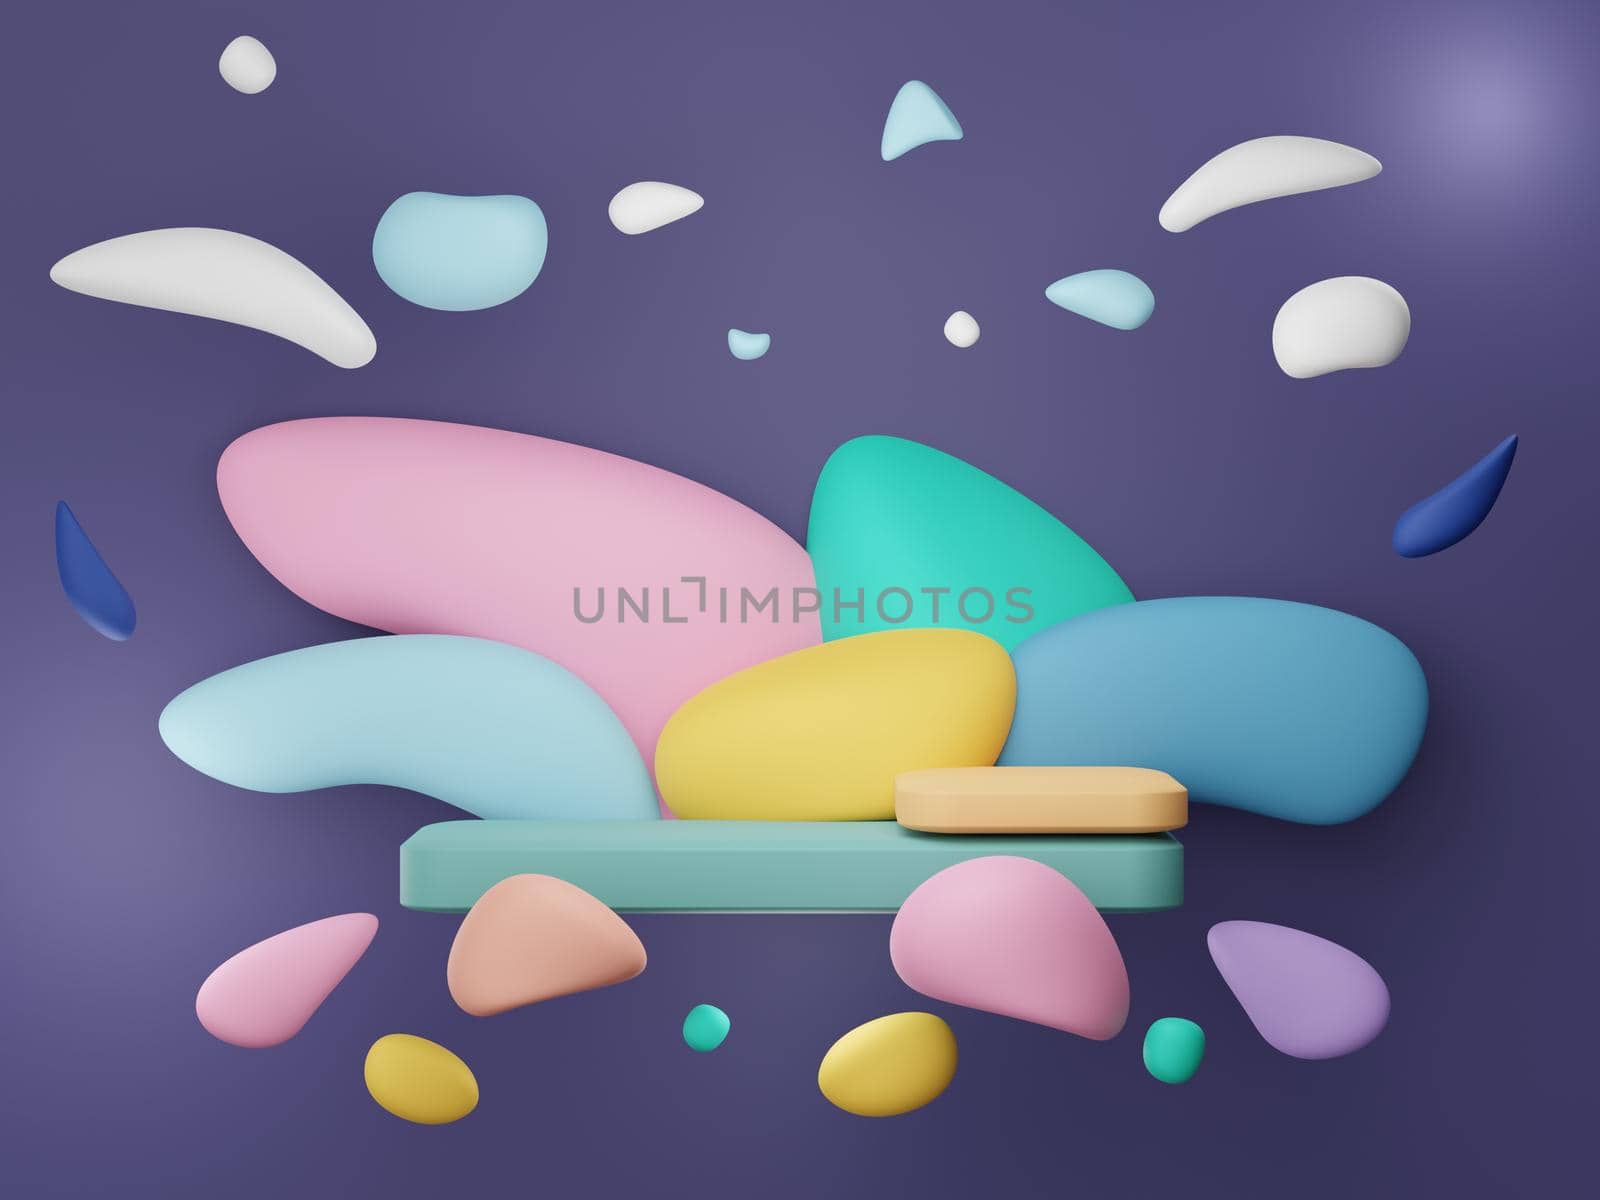 3d render illustration of minimal geometric shapes. Floating fluffy stylish art design. Cute objects on pastel background. by tanatpon13p